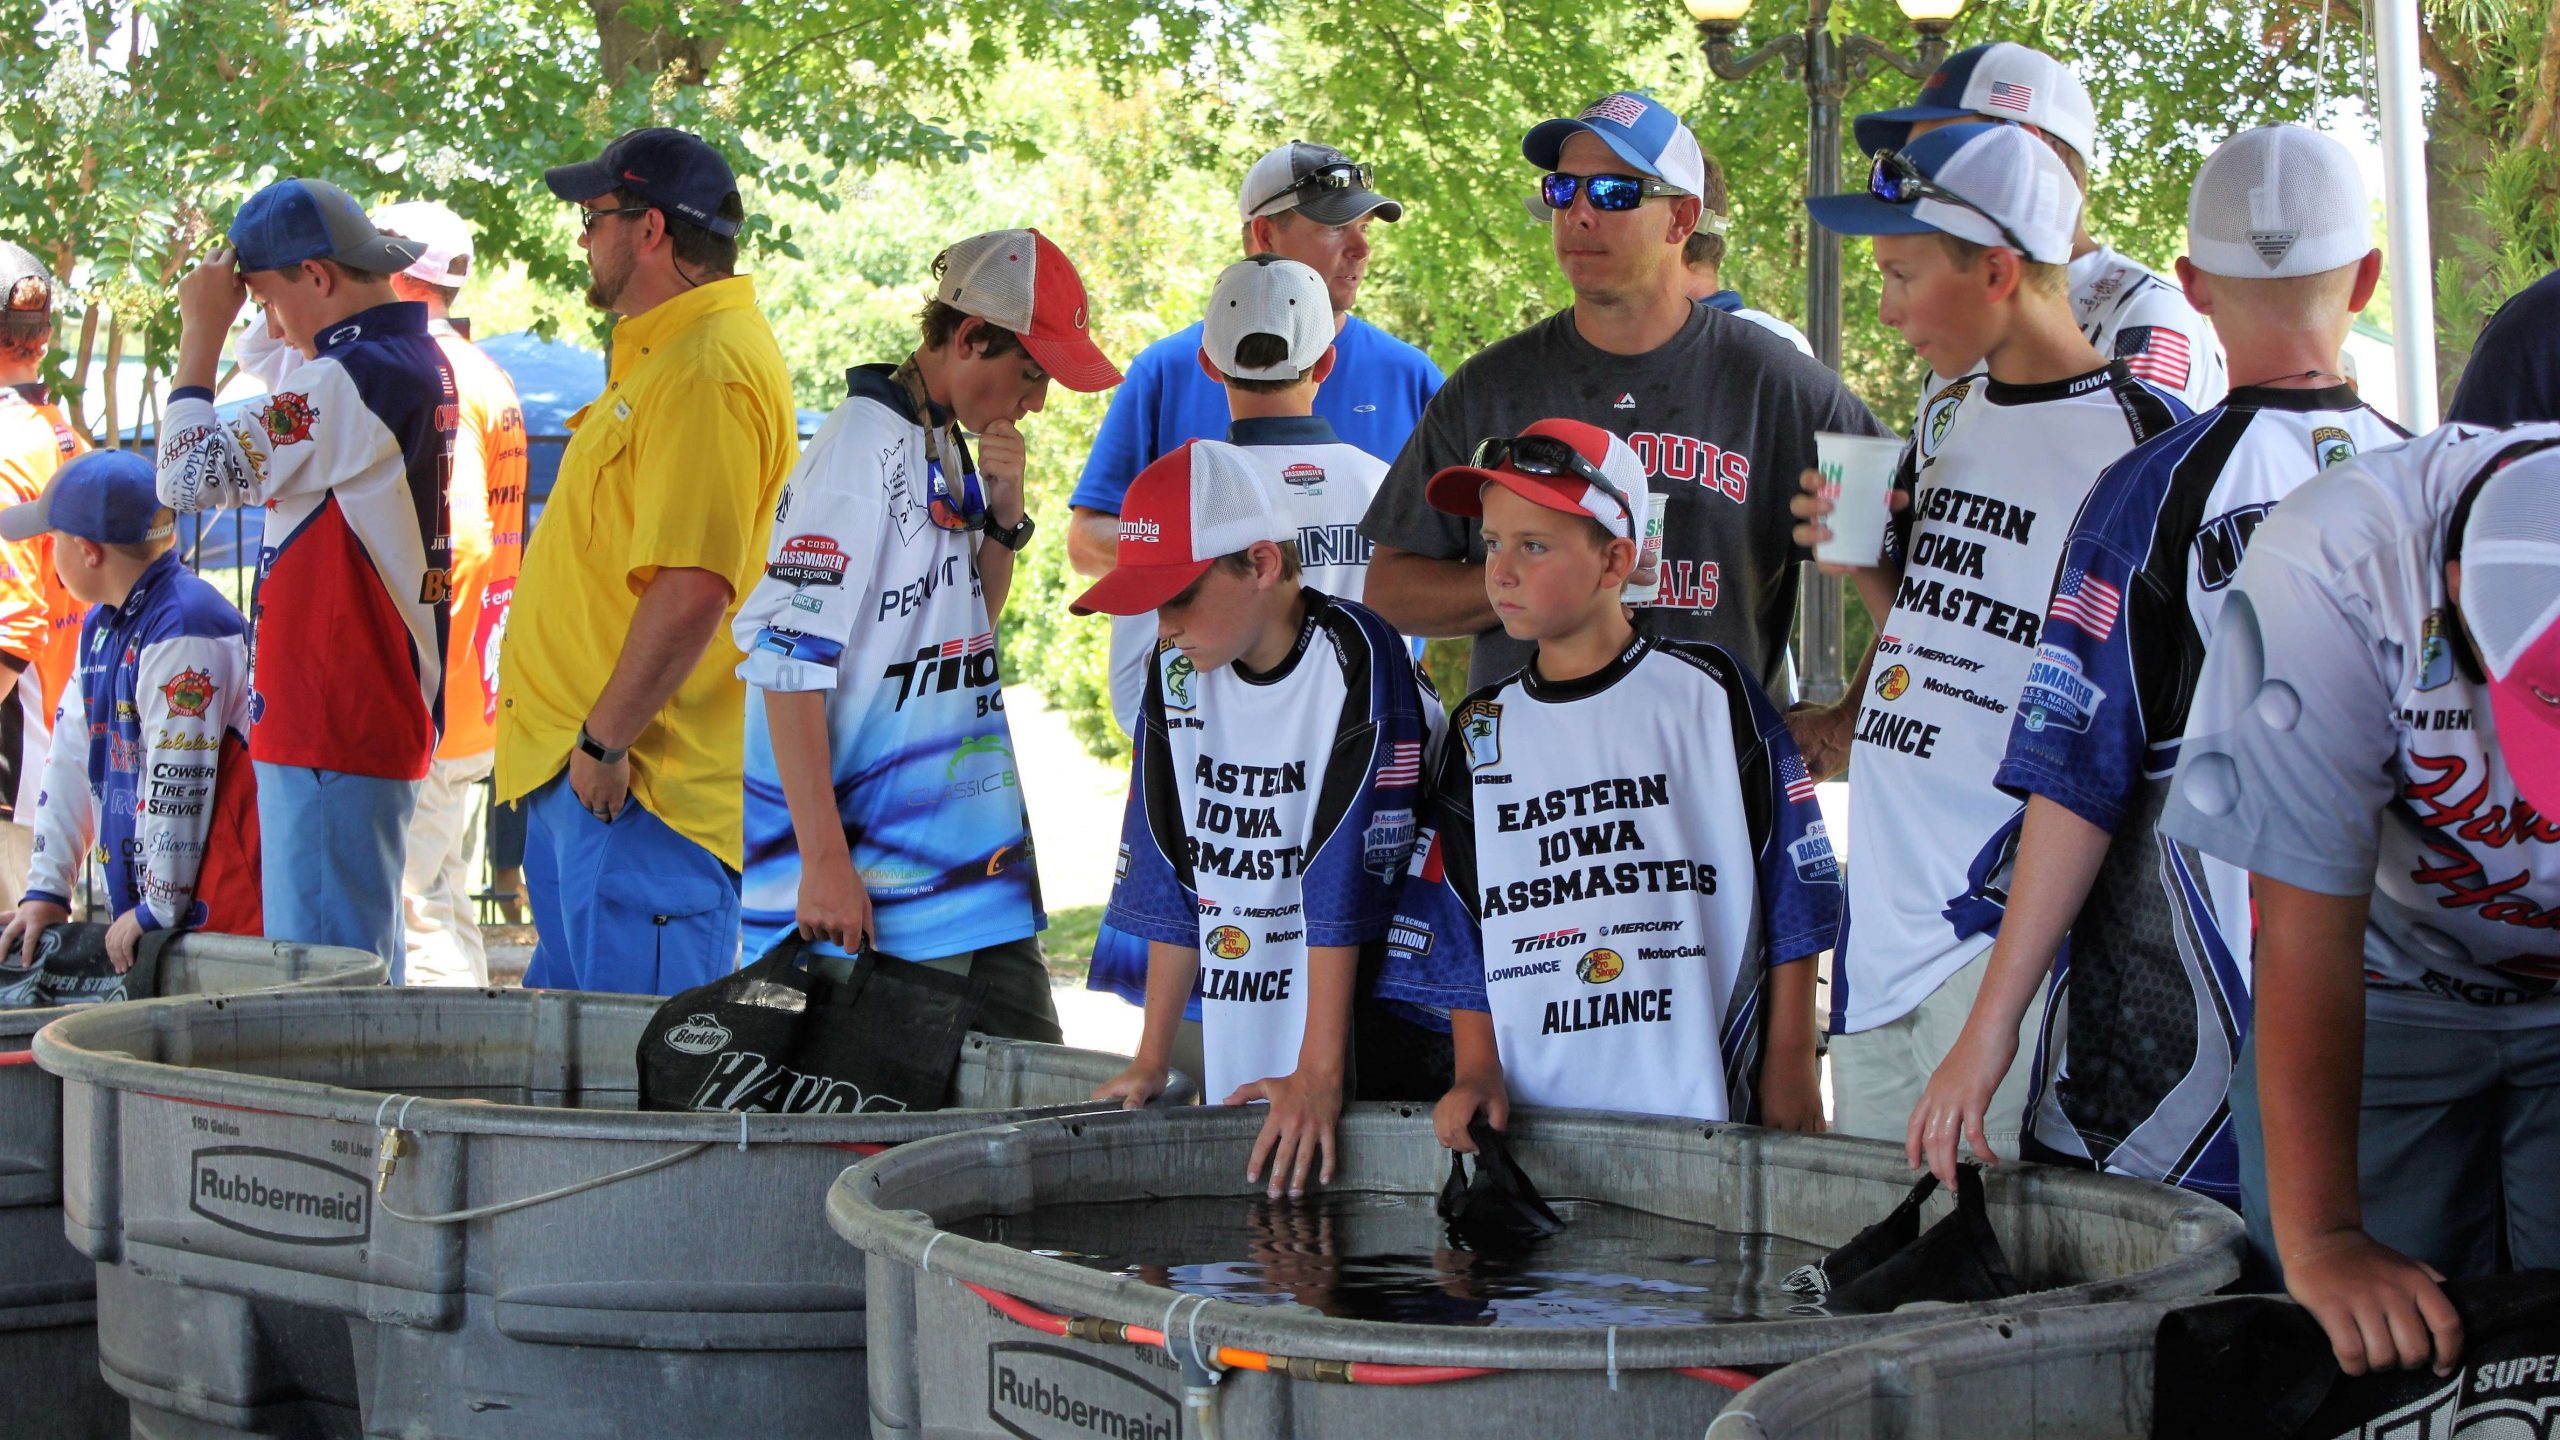 Teams from 28 states and Canada are represented in the championship which is being held on Carroll County 1,000 Acre Recreational Lake in northwest Tennessee. Here, a line of some of those teams begins to form at the tanks waiting for Tuesdayâs 1:45 p.m. start.